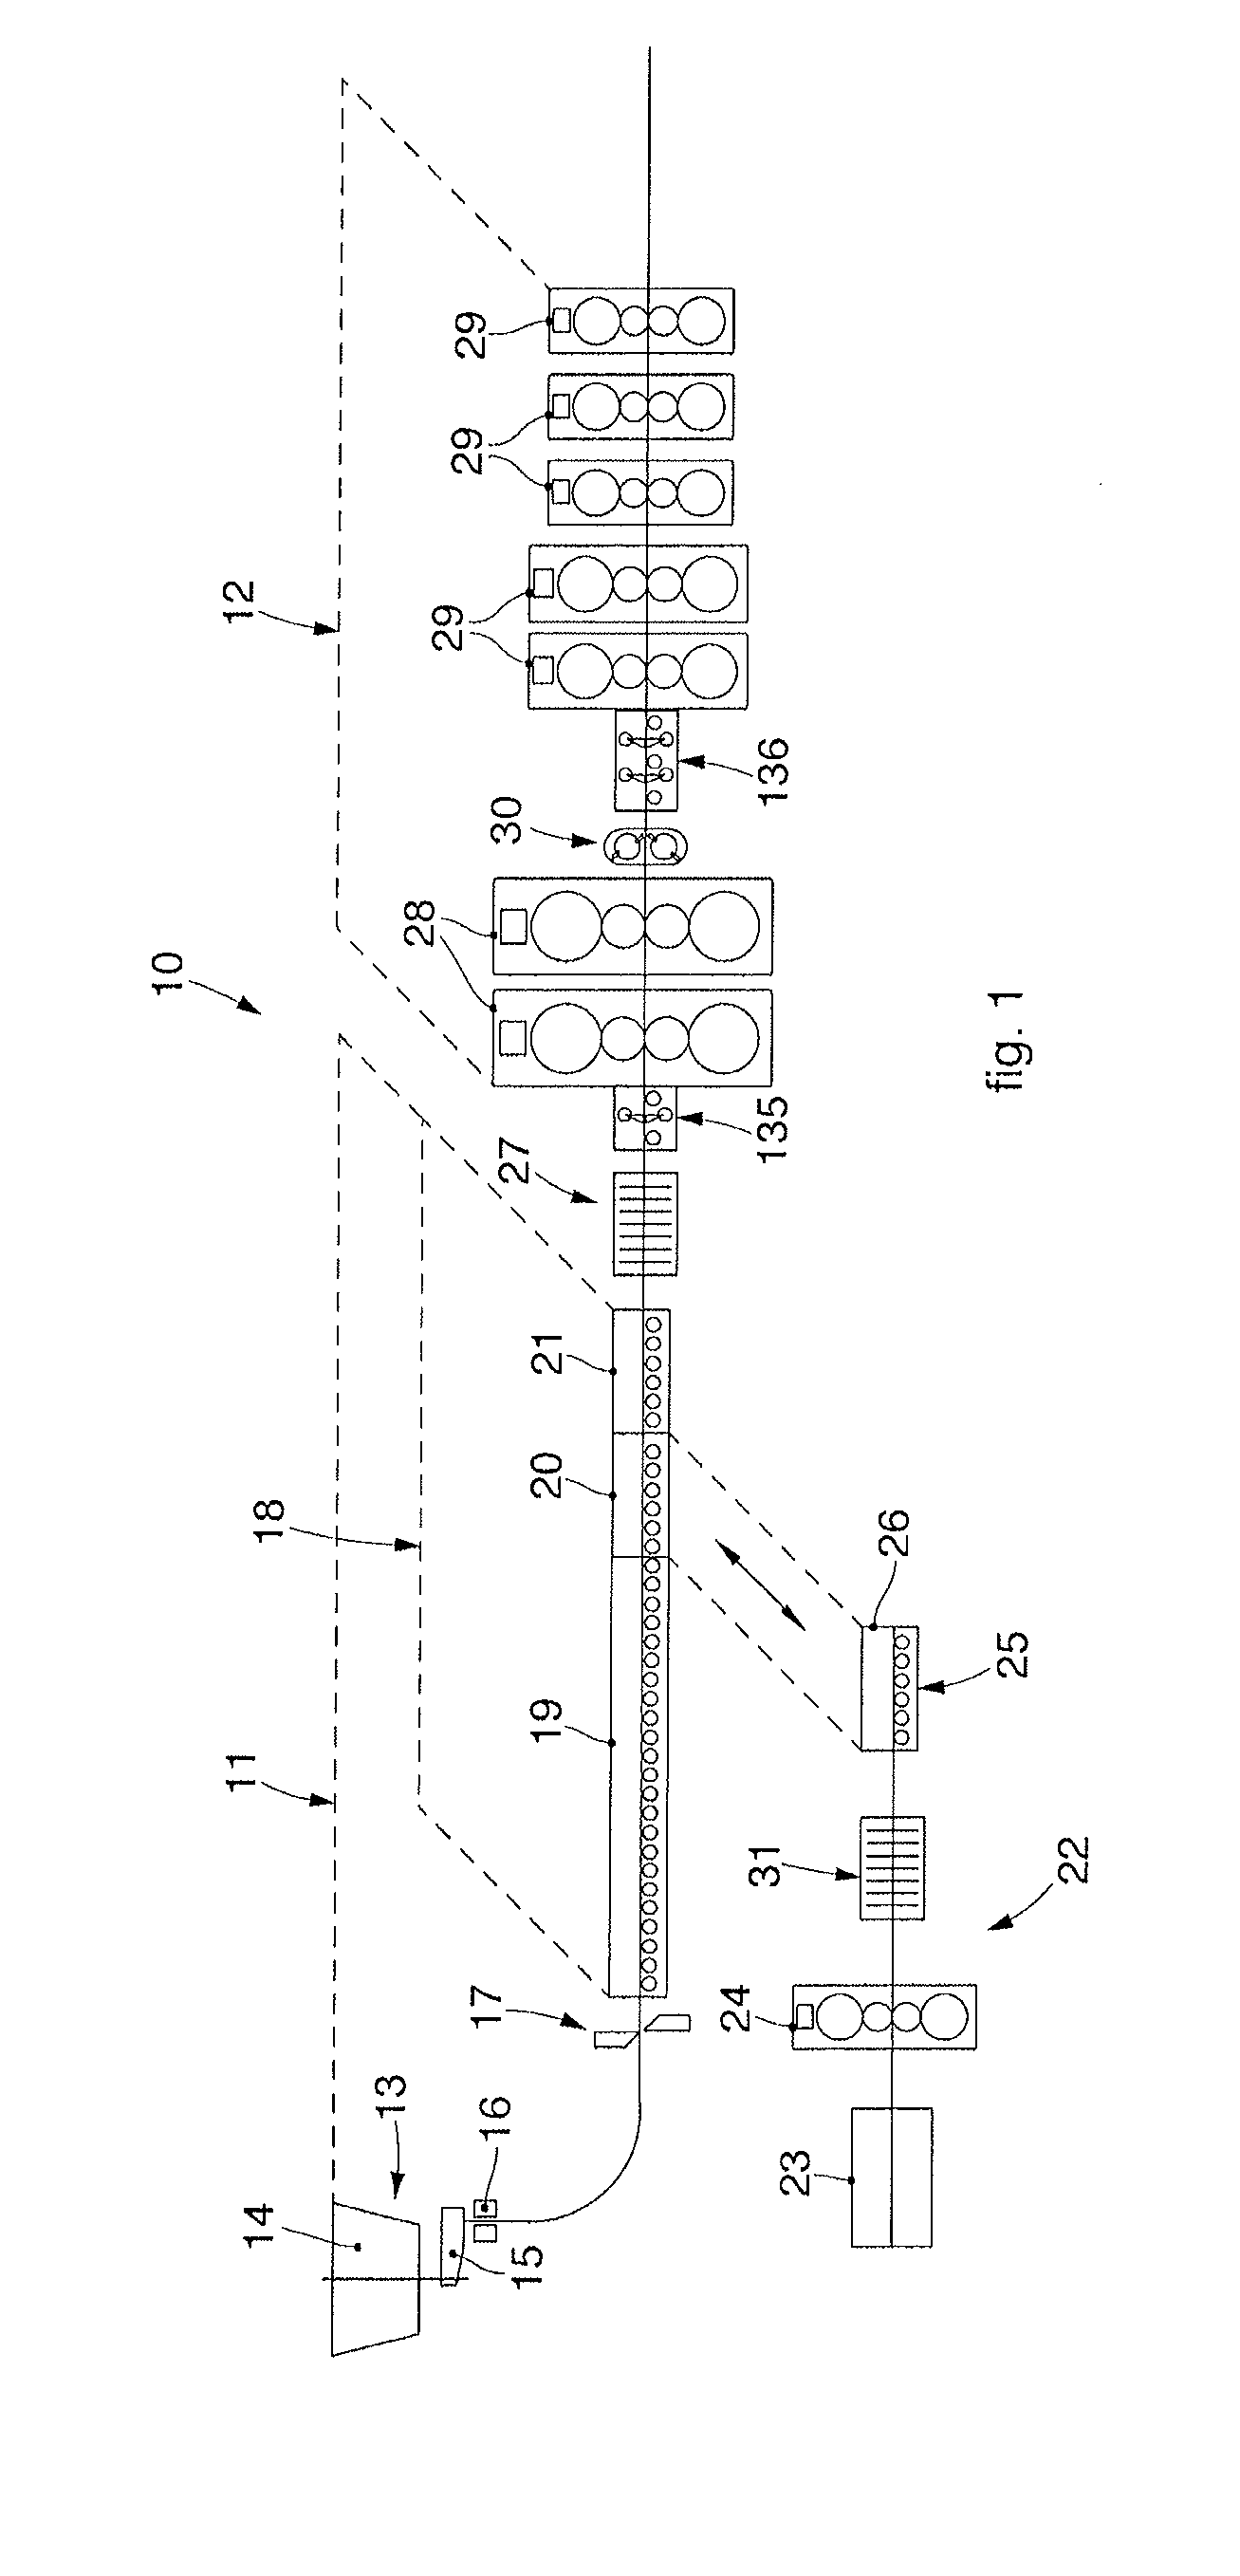 Plant and method for the production of metal